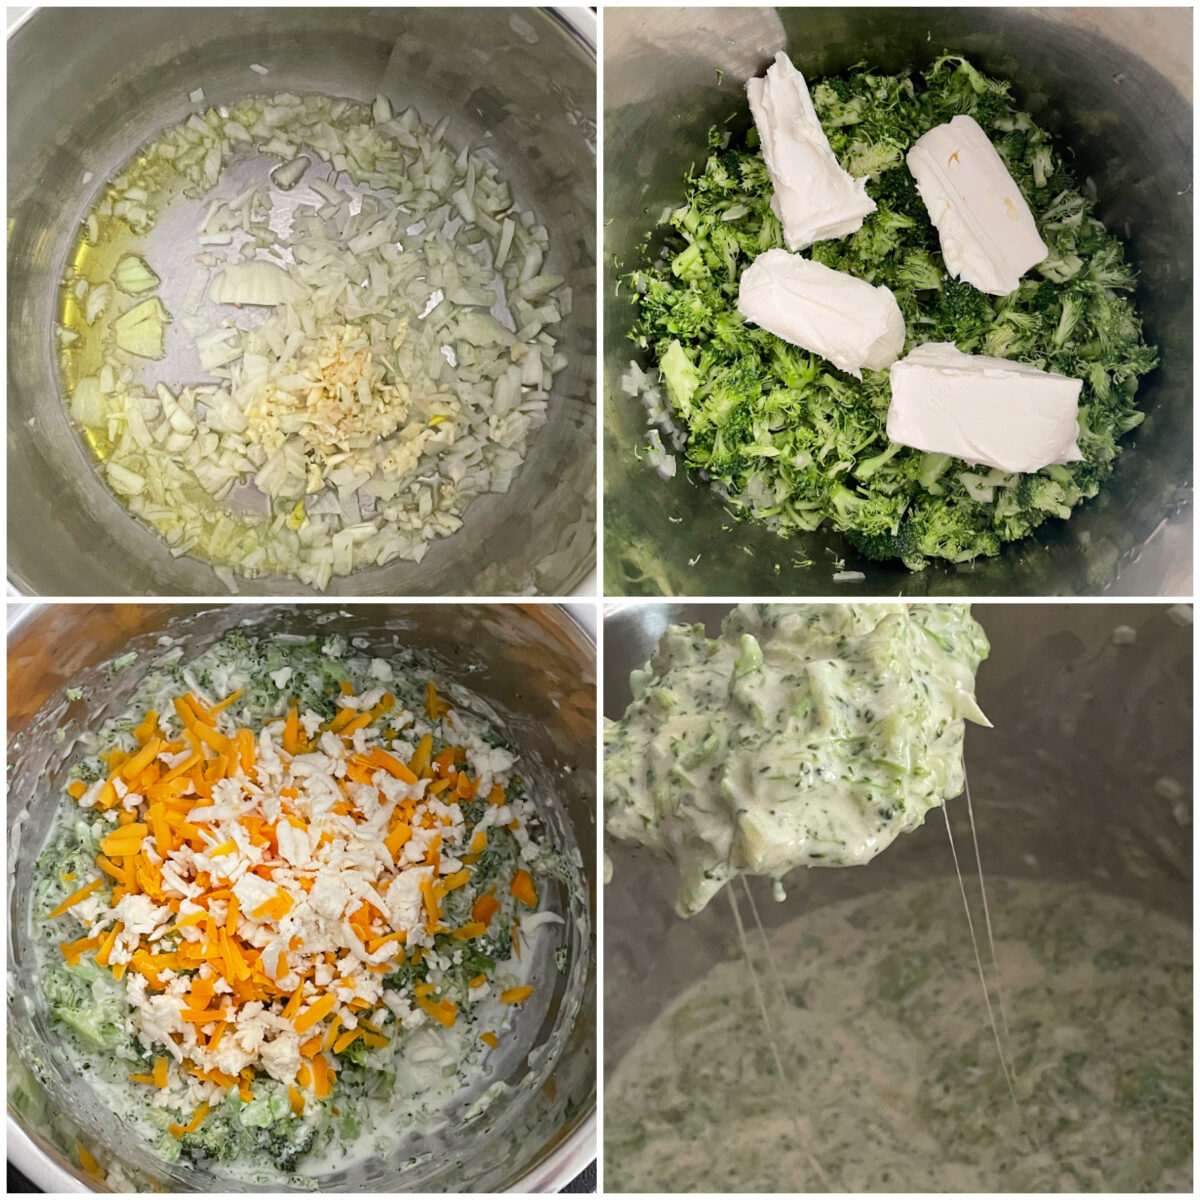 Steps for broccoli cheese dip.